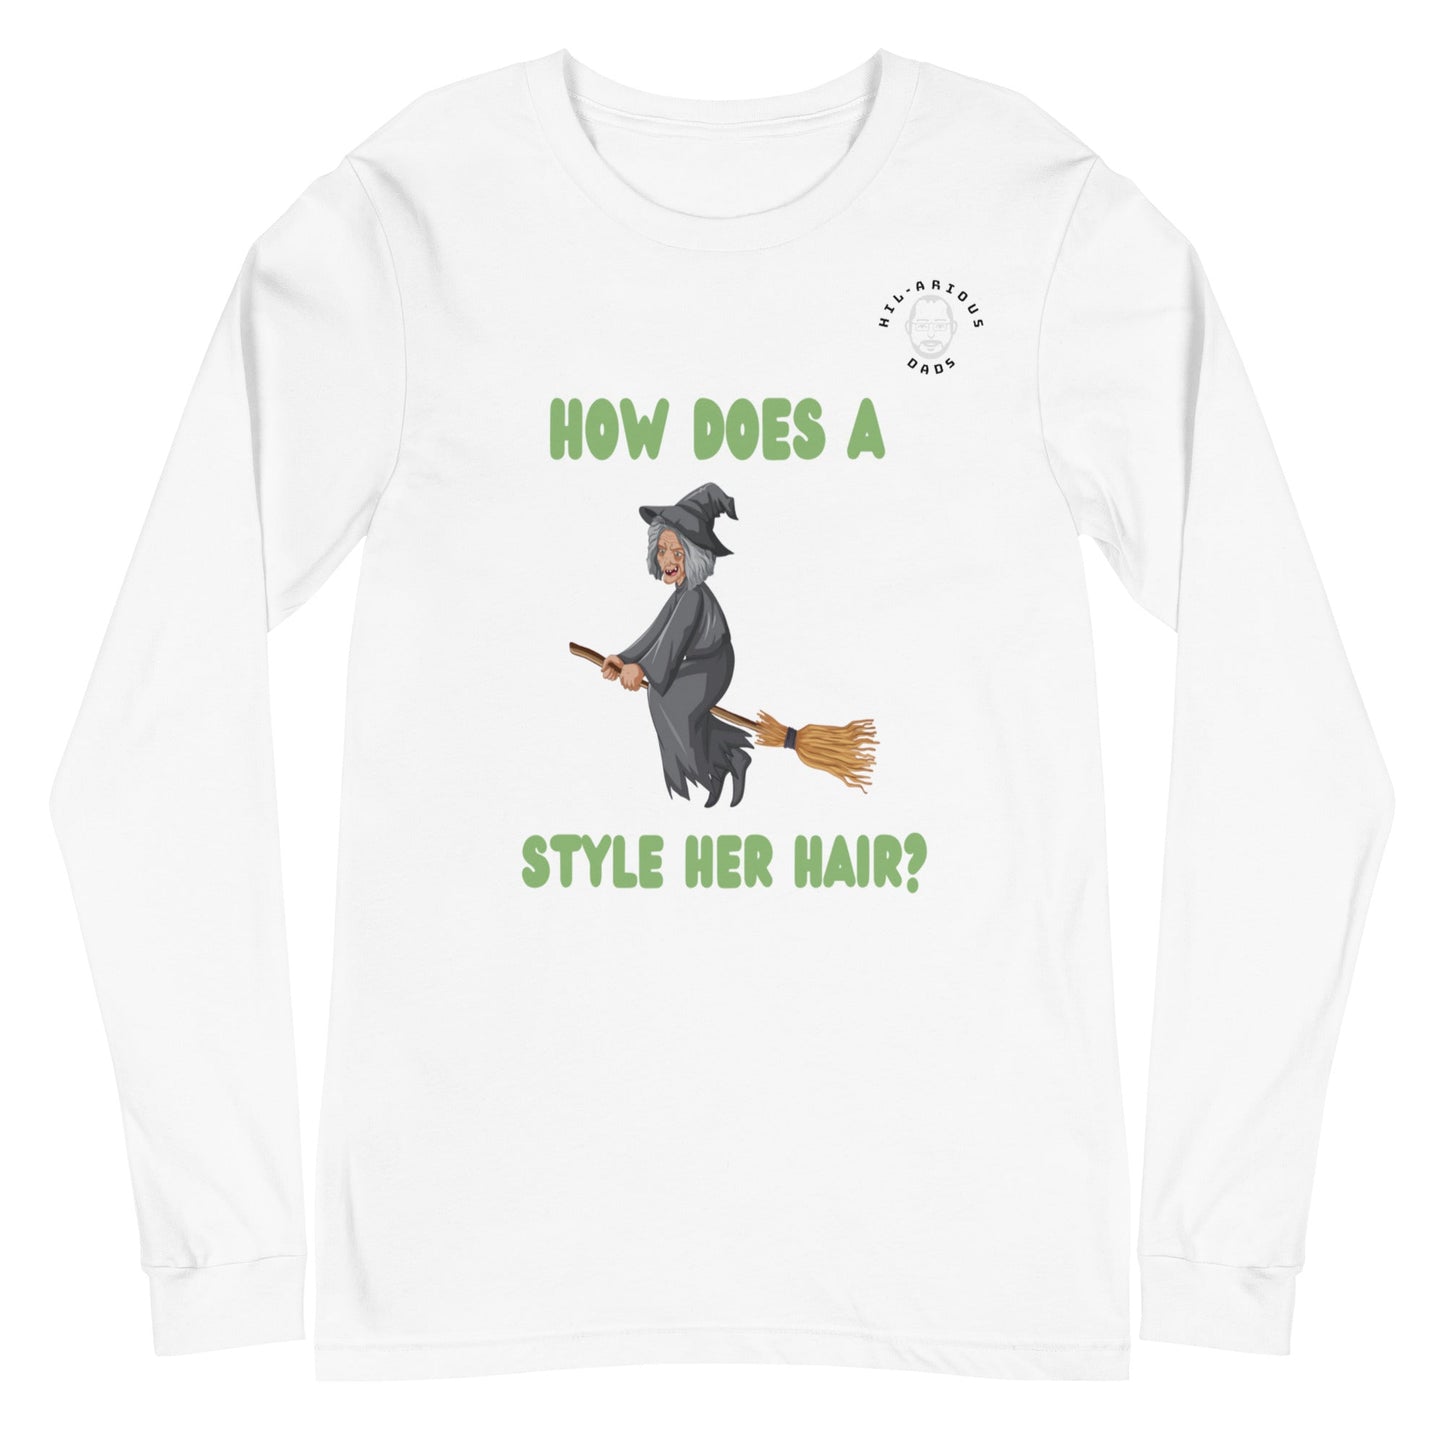 How does a witch style her hair?-Long Sleeve Tee - Hil-arious Dads